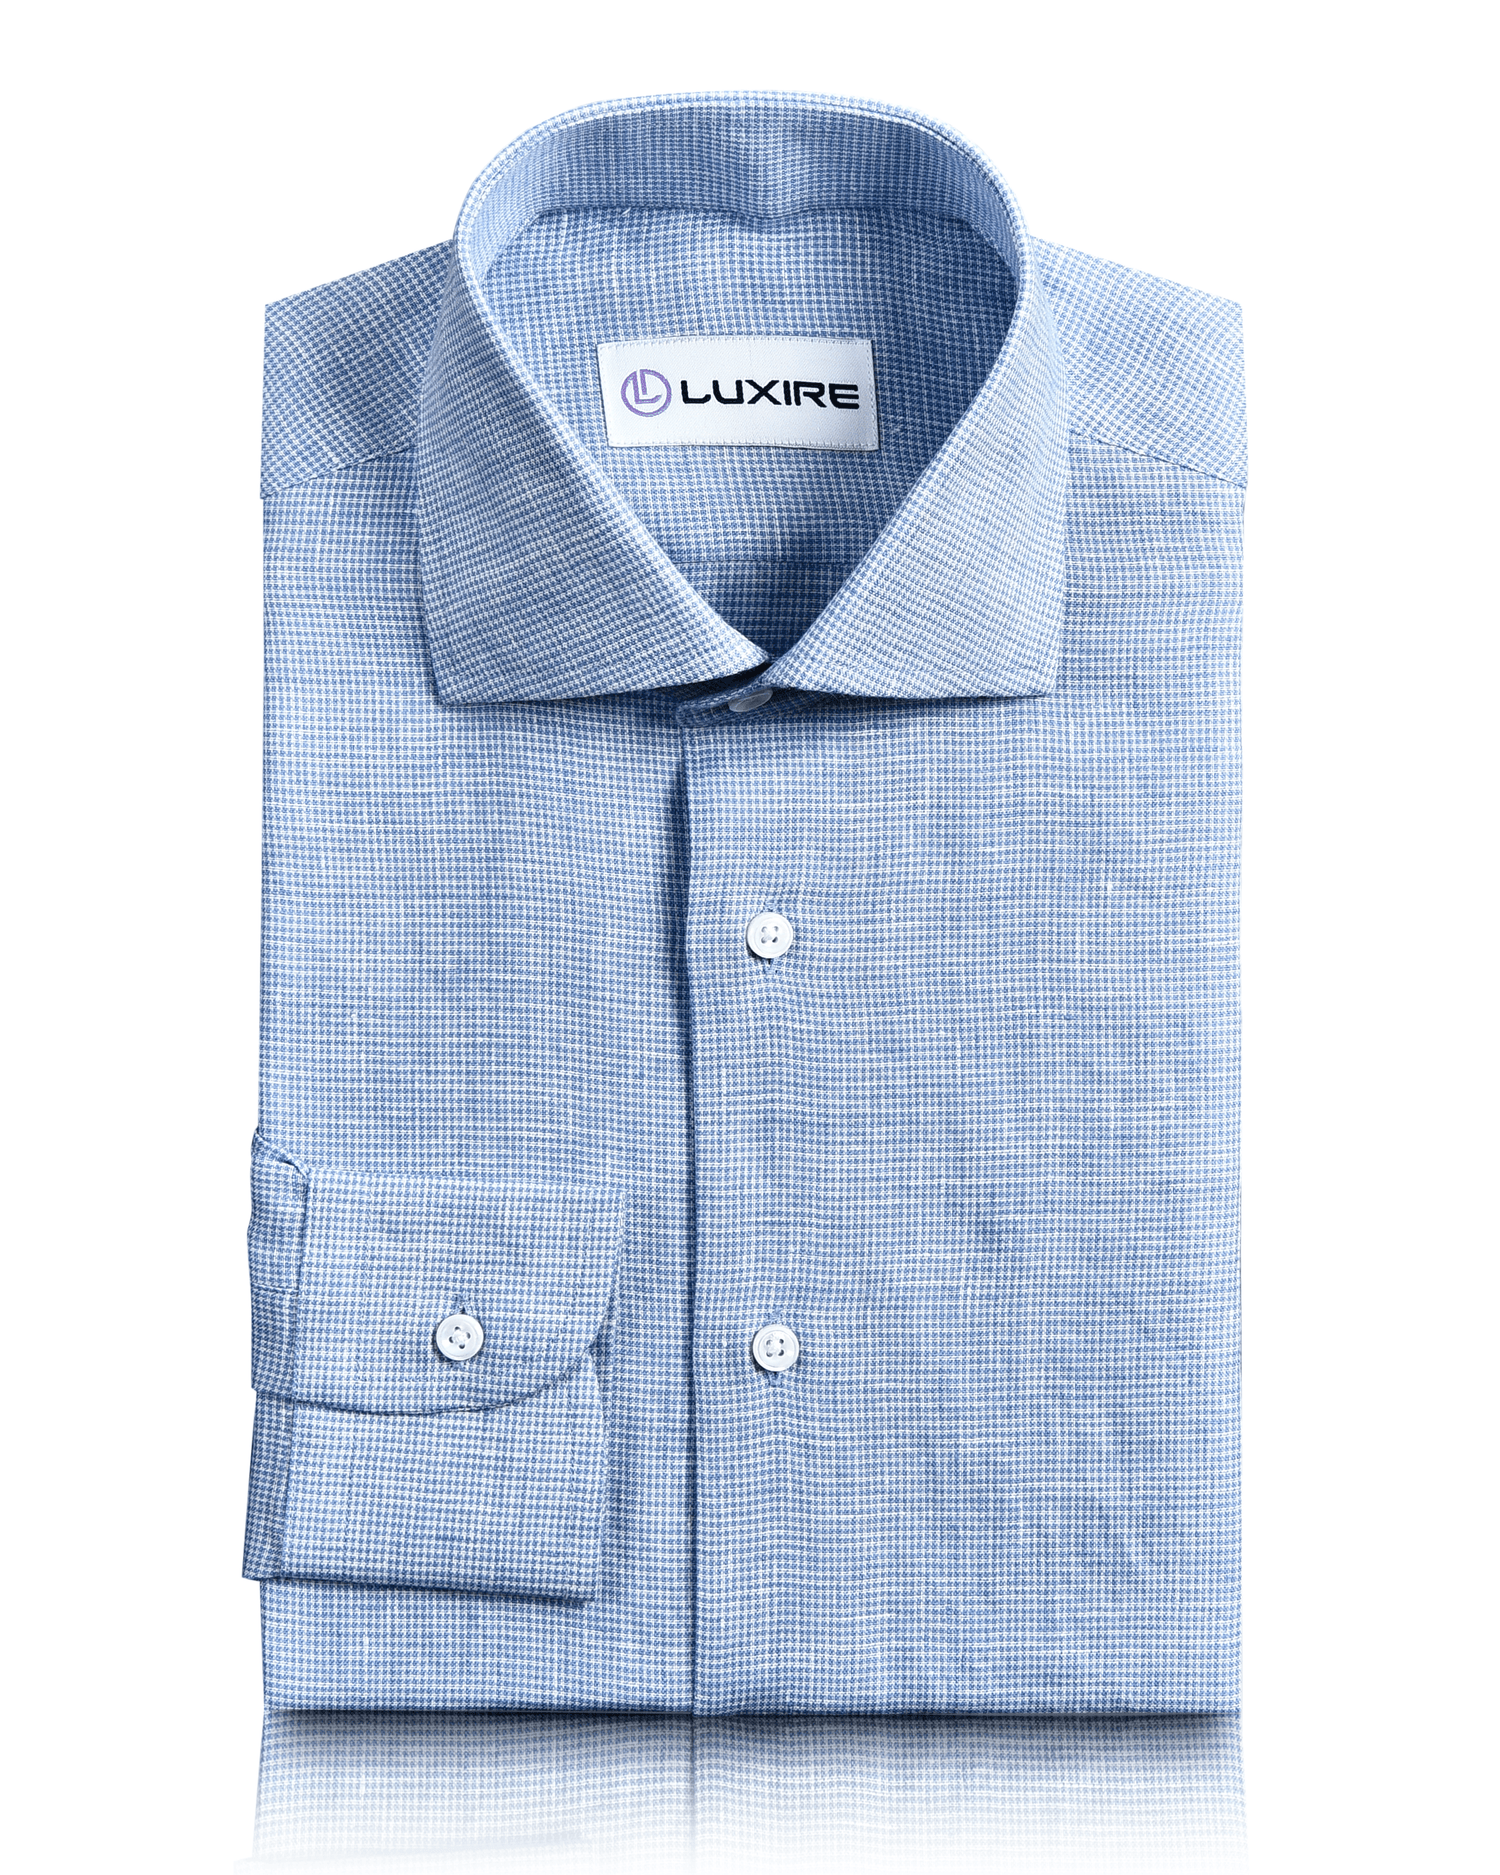 Front view of custom linen shirt for men in white blue micro houndstooth